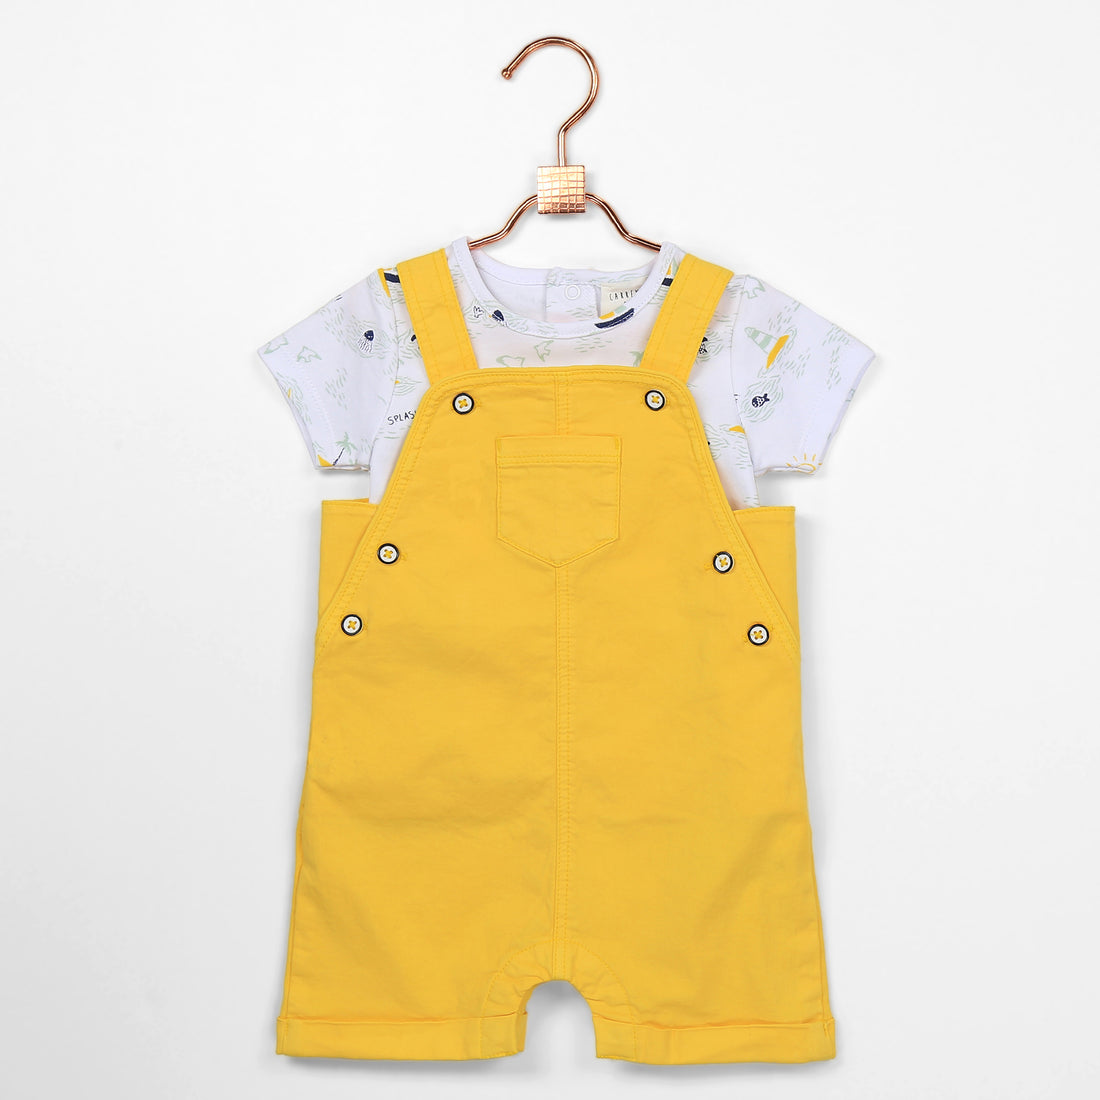 carrément-beau-short-sleeves-tee-shirt-summer-infant-white-carr-s22-y05158-10b-6y- (4)